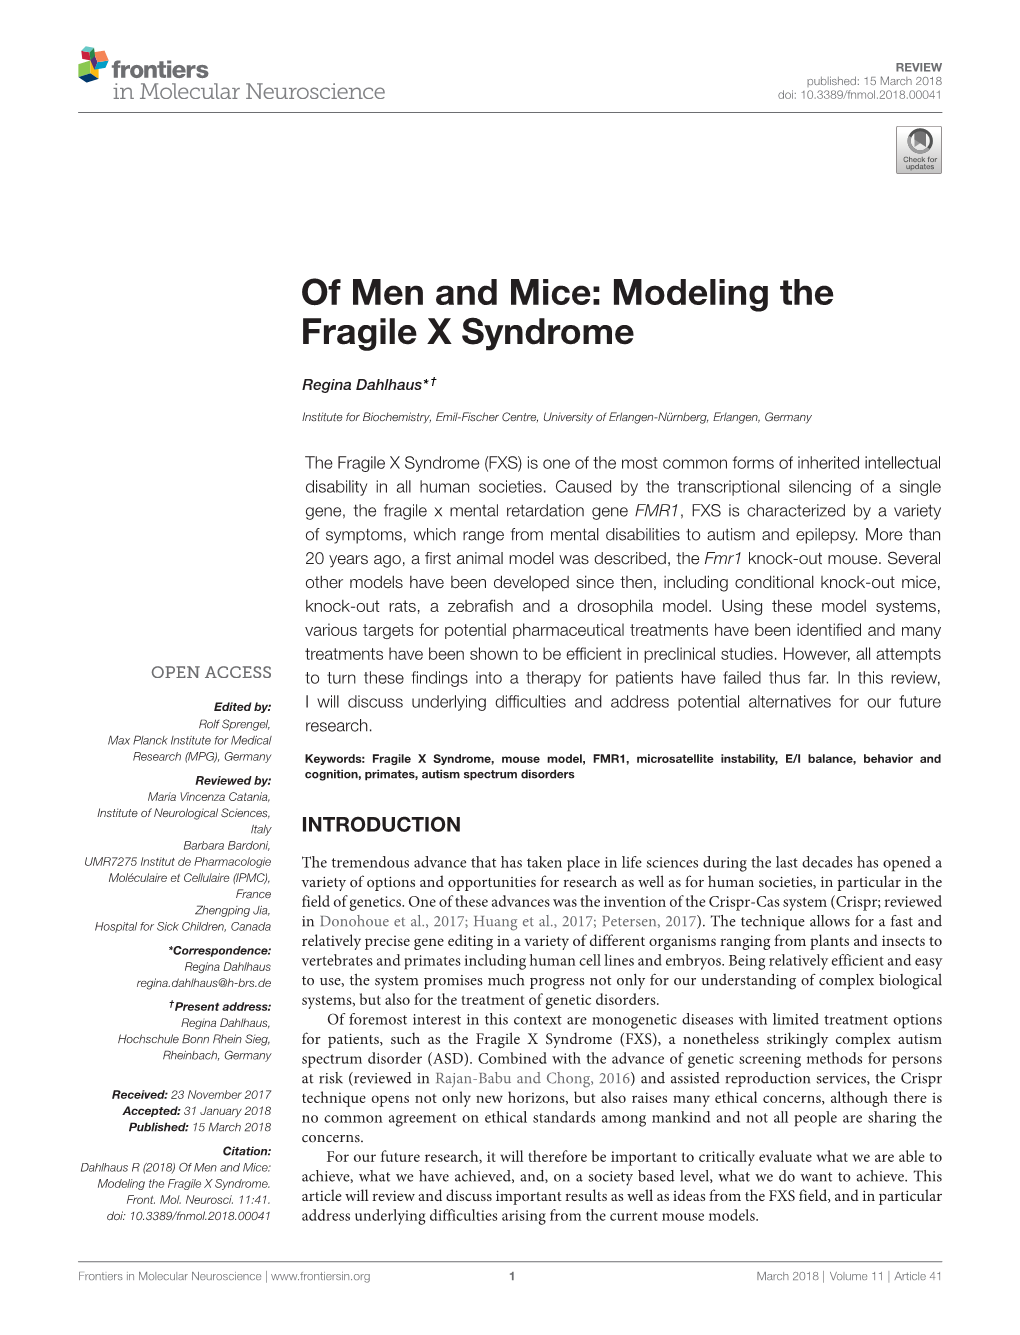 Of Men and Mice: Modeling the Fragile X Syndrome